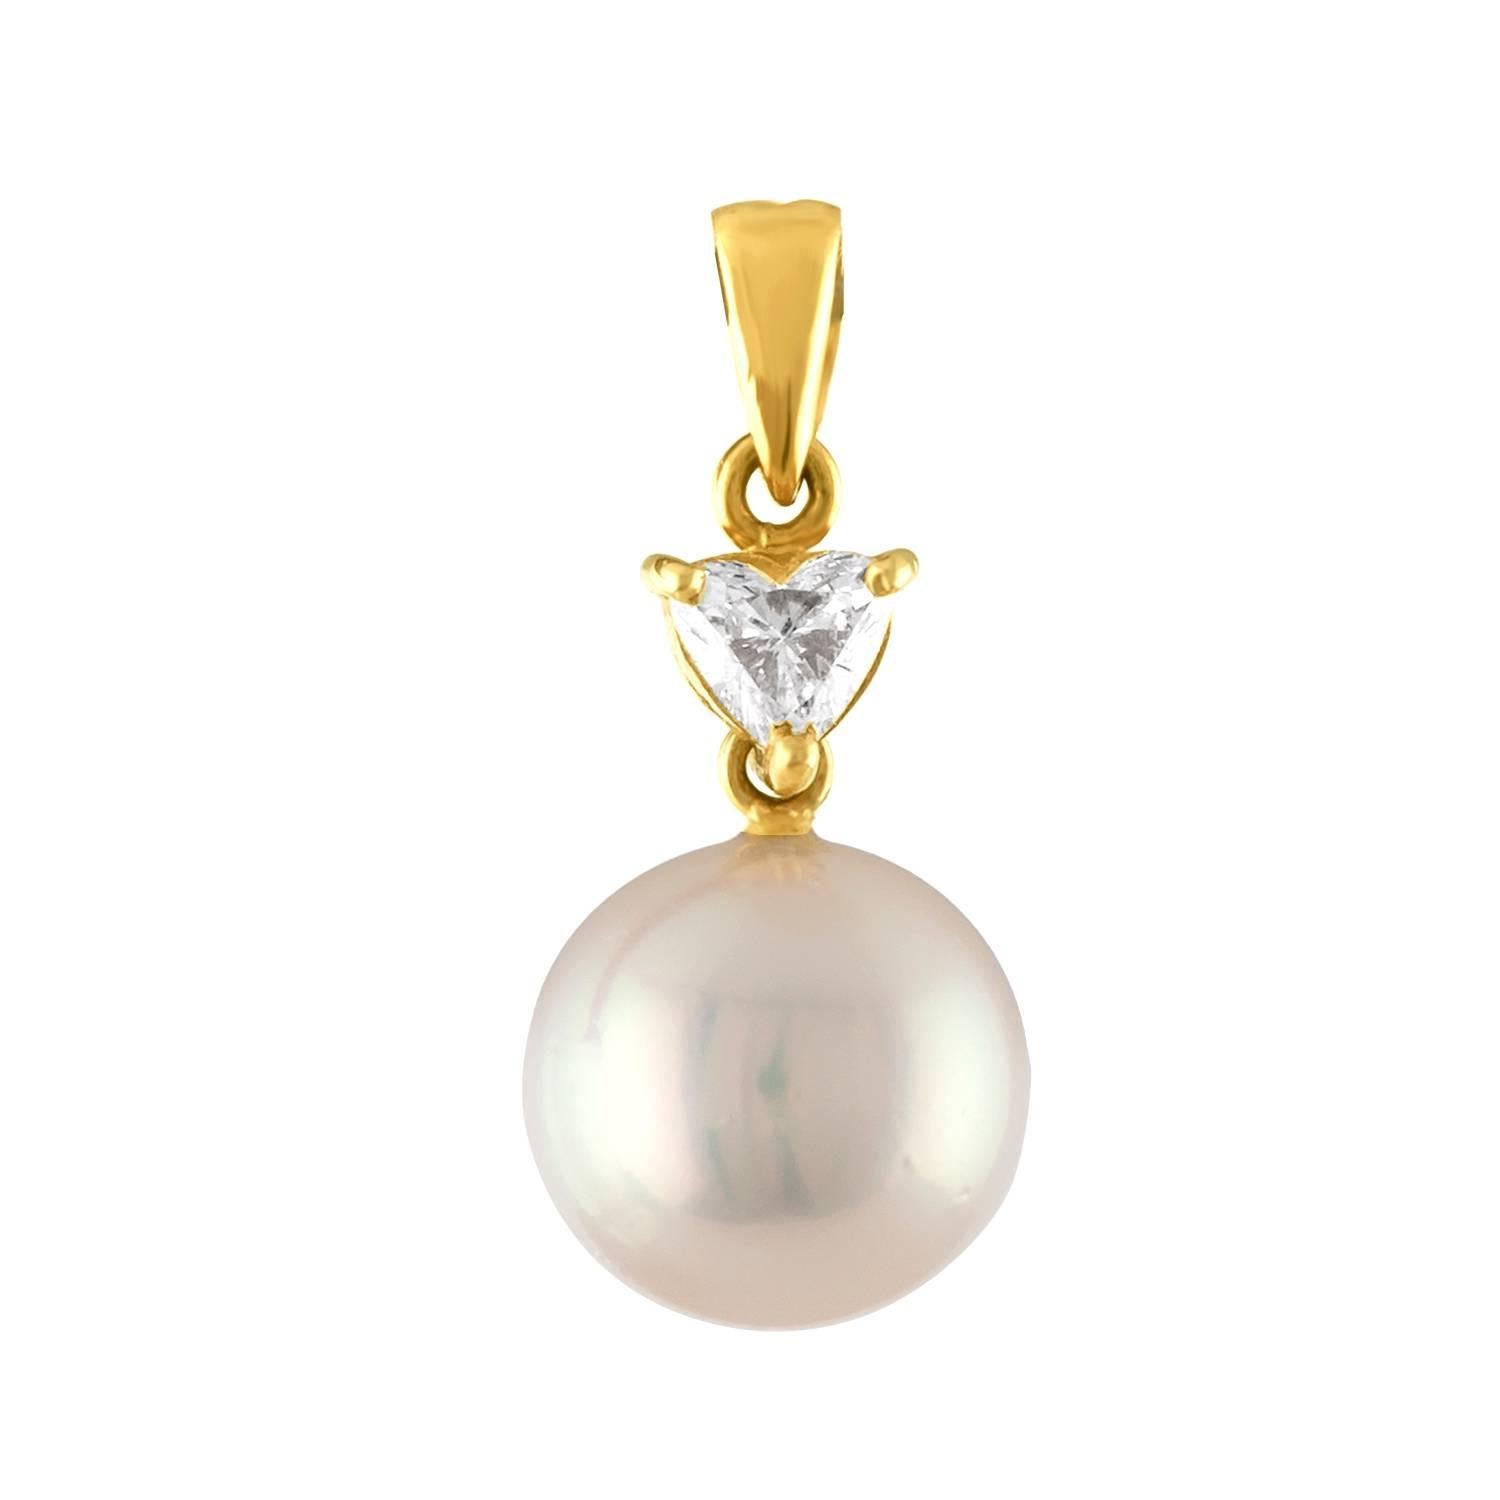 Very Delicate Gold Pearl Necklace
The necklace is 18K Yellow Gold
The Diamond is heart shaped 0.30 Carats E VS
The Fresh Water Cultured Pearl is 9.6mm
The chain is 18K Yellow Gold and is 16